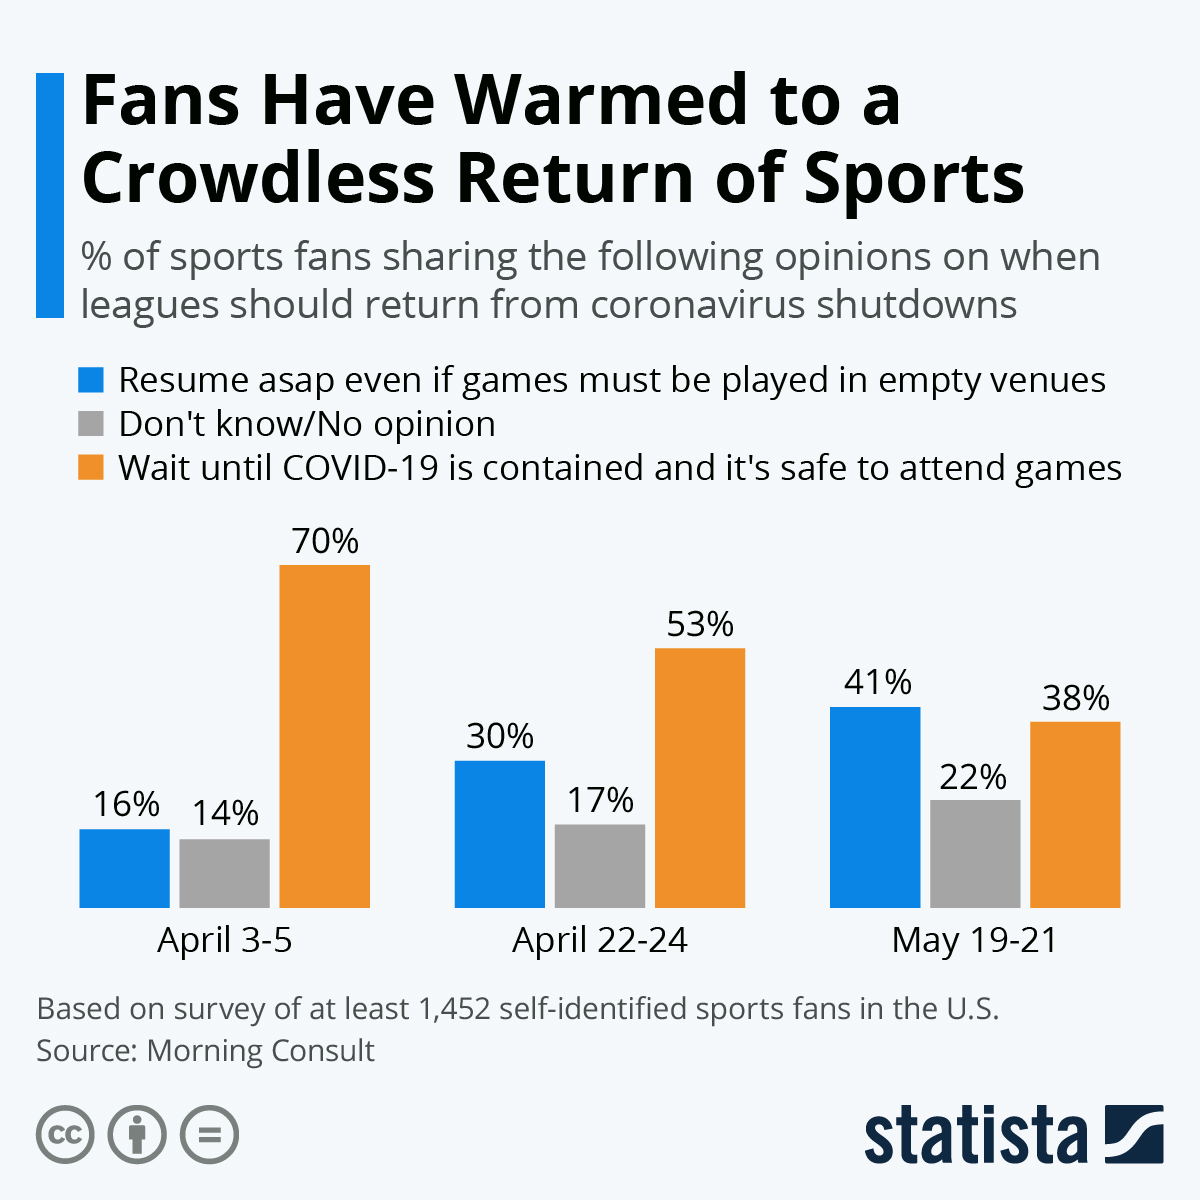 Fans Have Warmed to a Crowdless Return of Sports